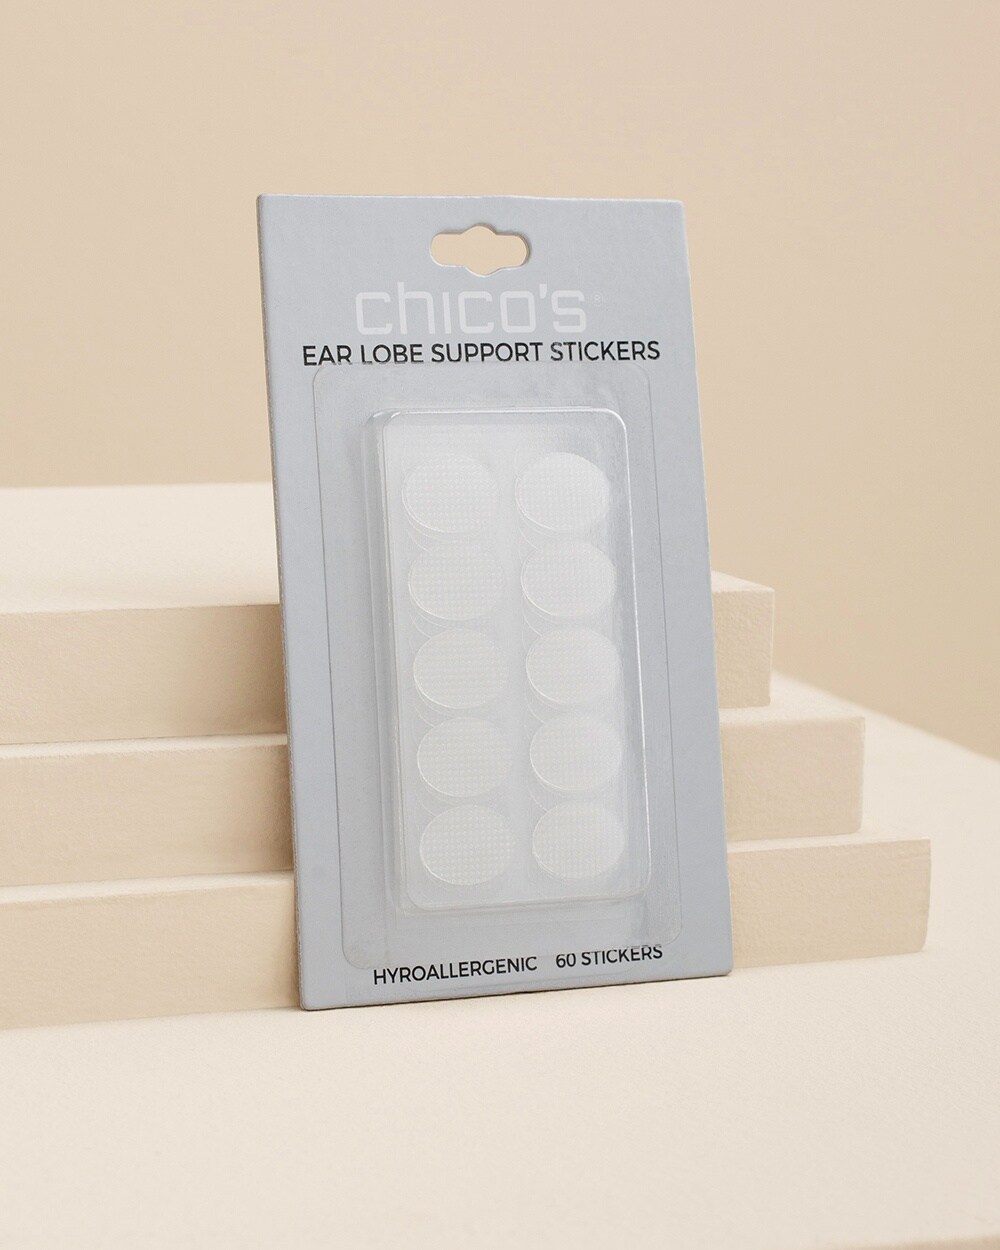 Ear Lobe Support Stickers - Chico's